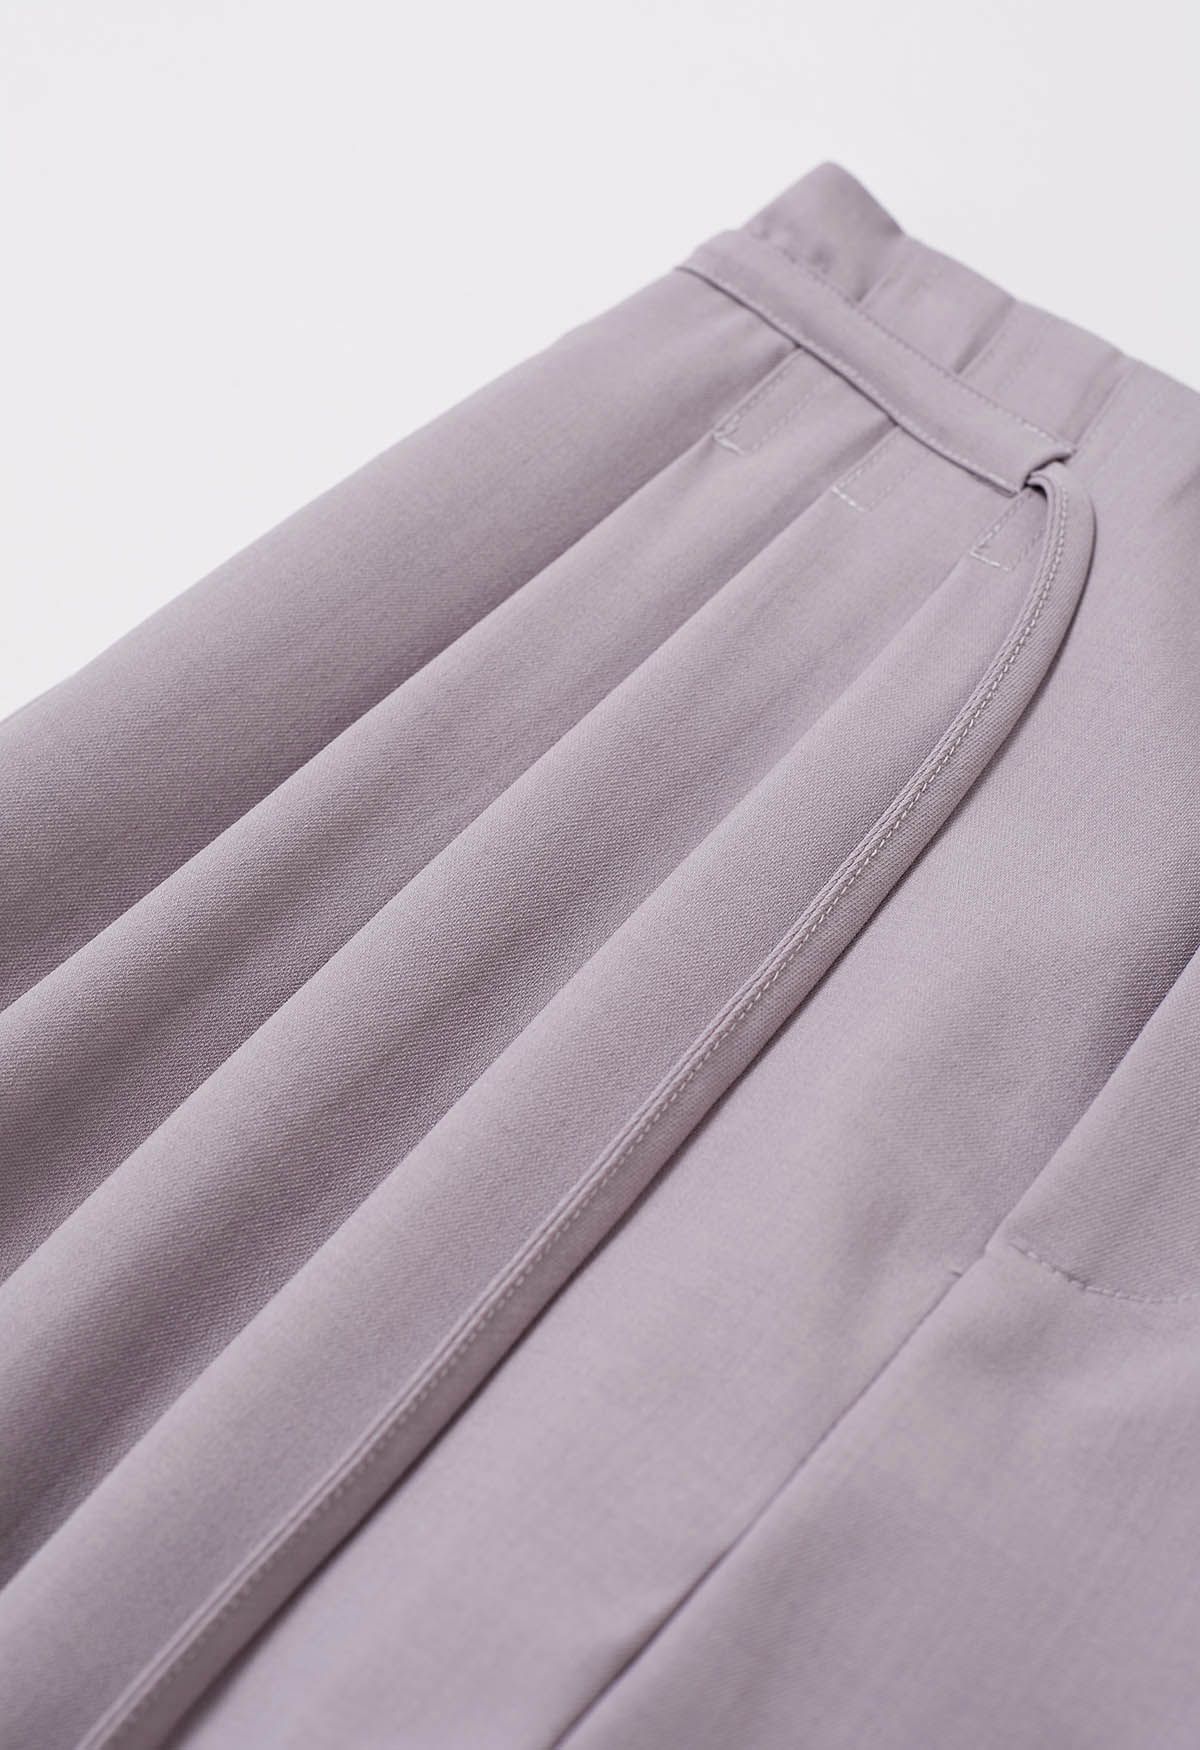 Self-Tie String Pleat Wide-Leg Pants in Lilac - Retro, Indie and Unique ...